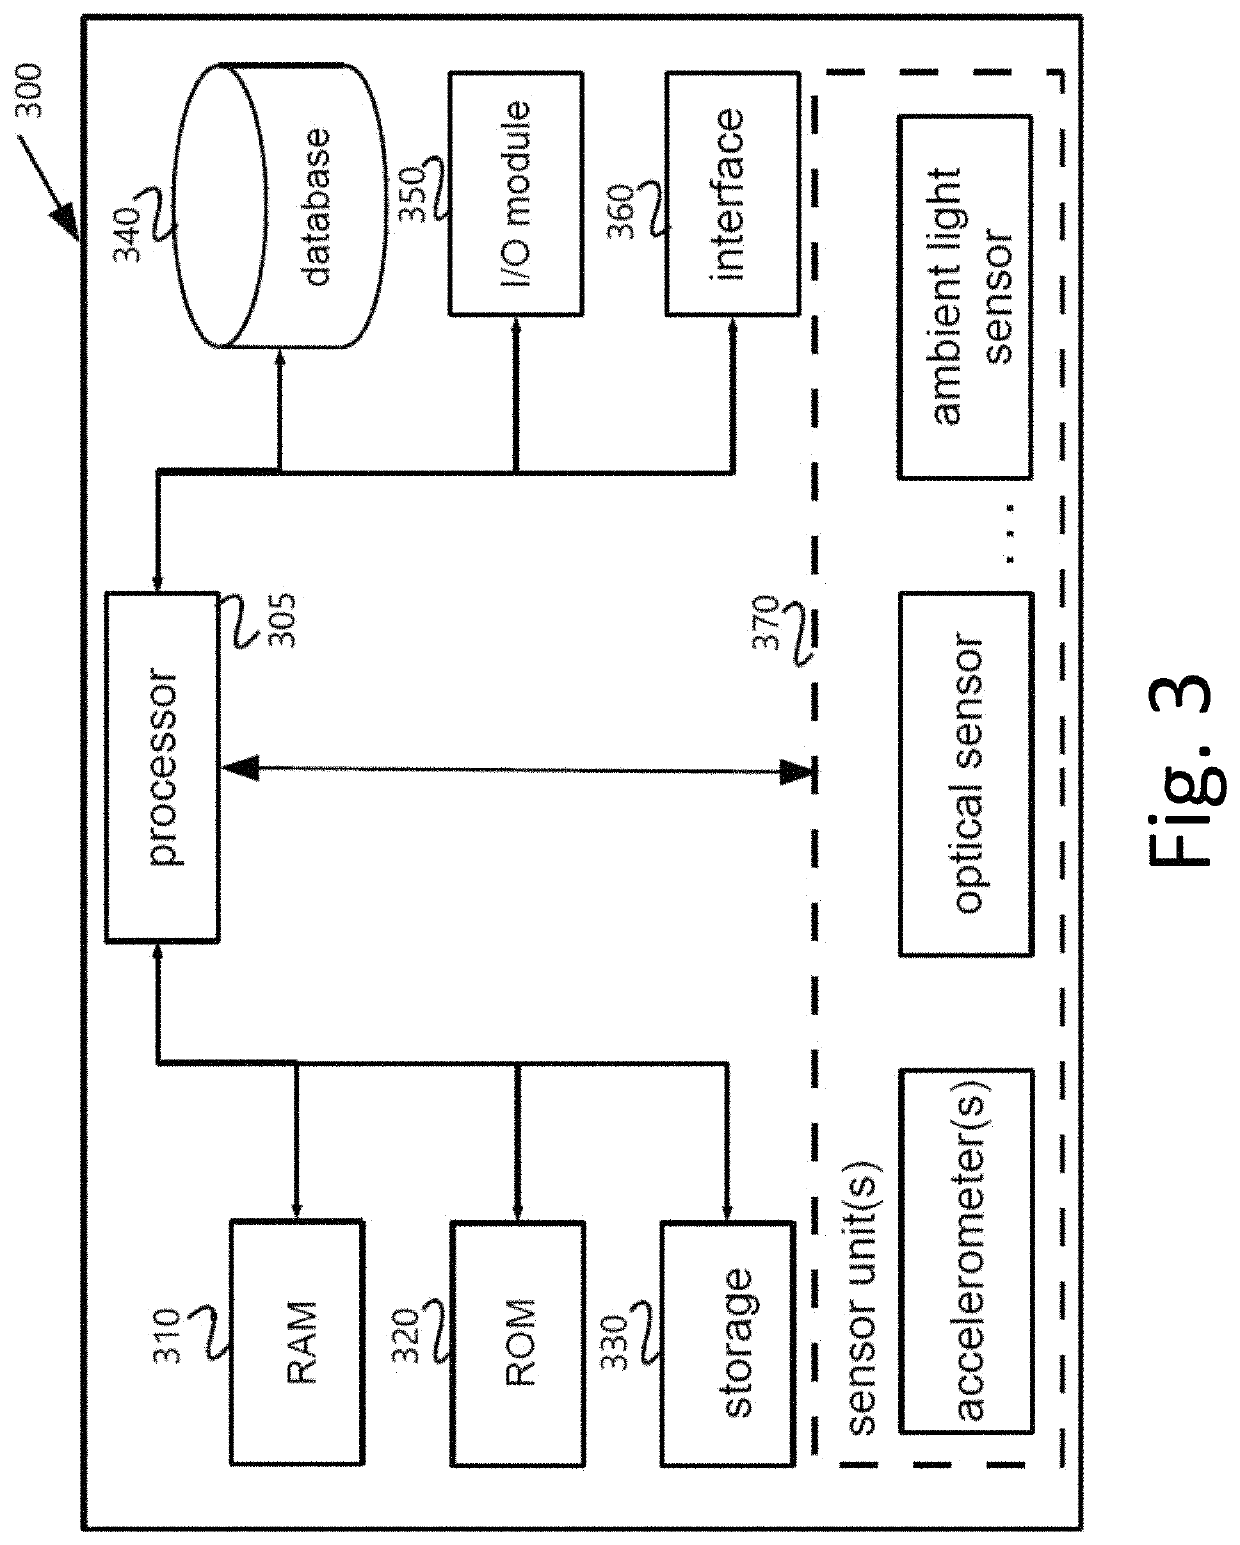 Systems and methods for respiratory analysis